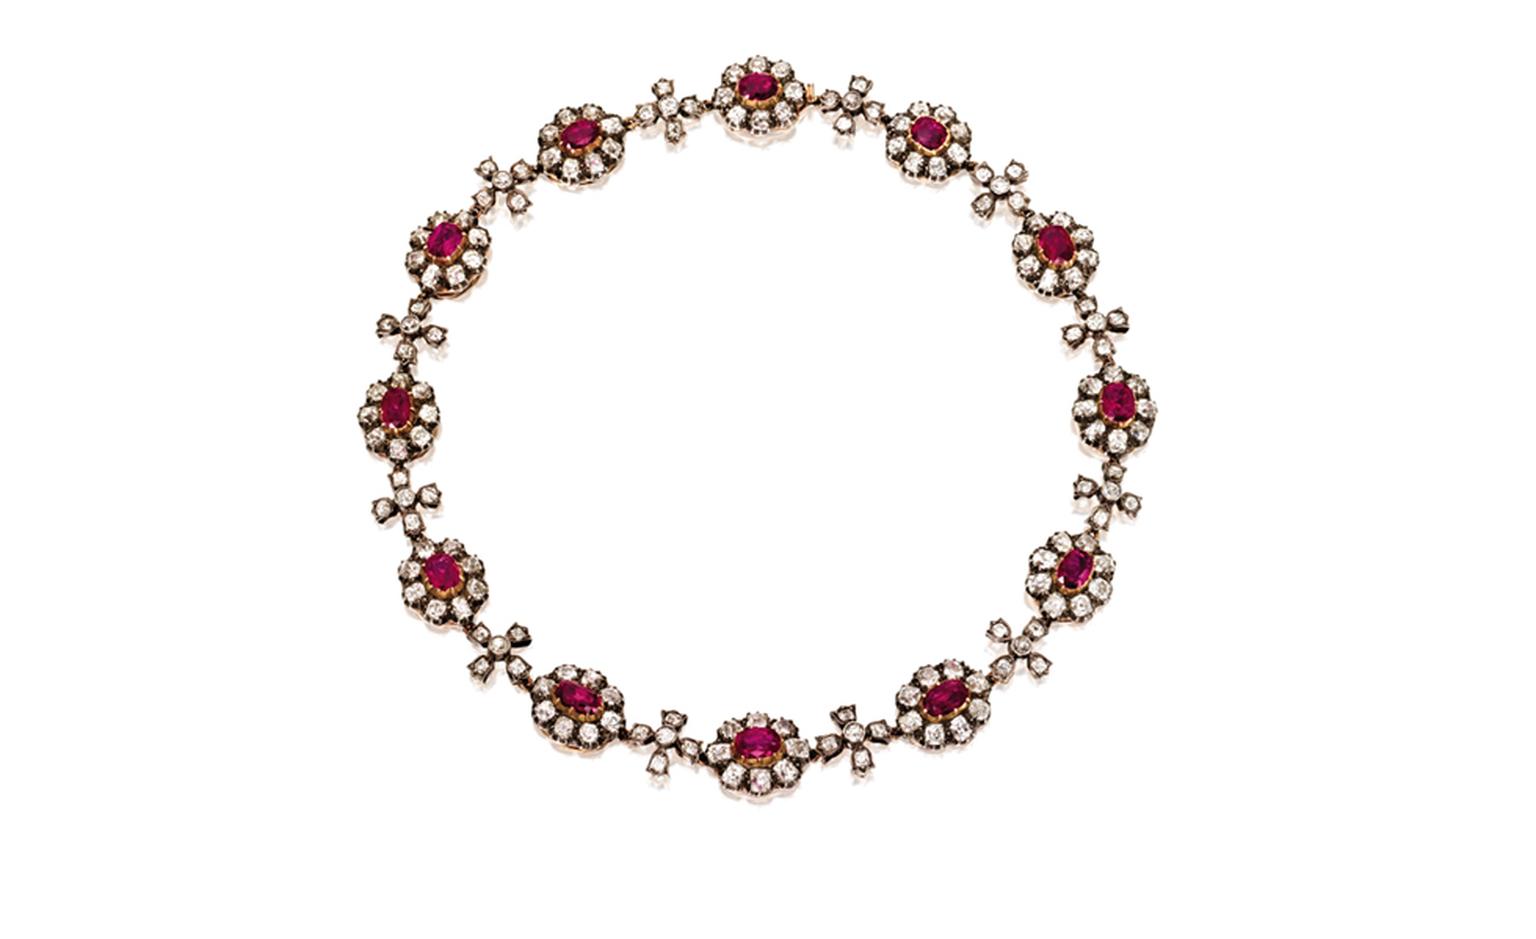 Lot 338. Gold Silver Ruby and Diamond Necklace. Est. $80/129,000. SOLD FOR $152,500.